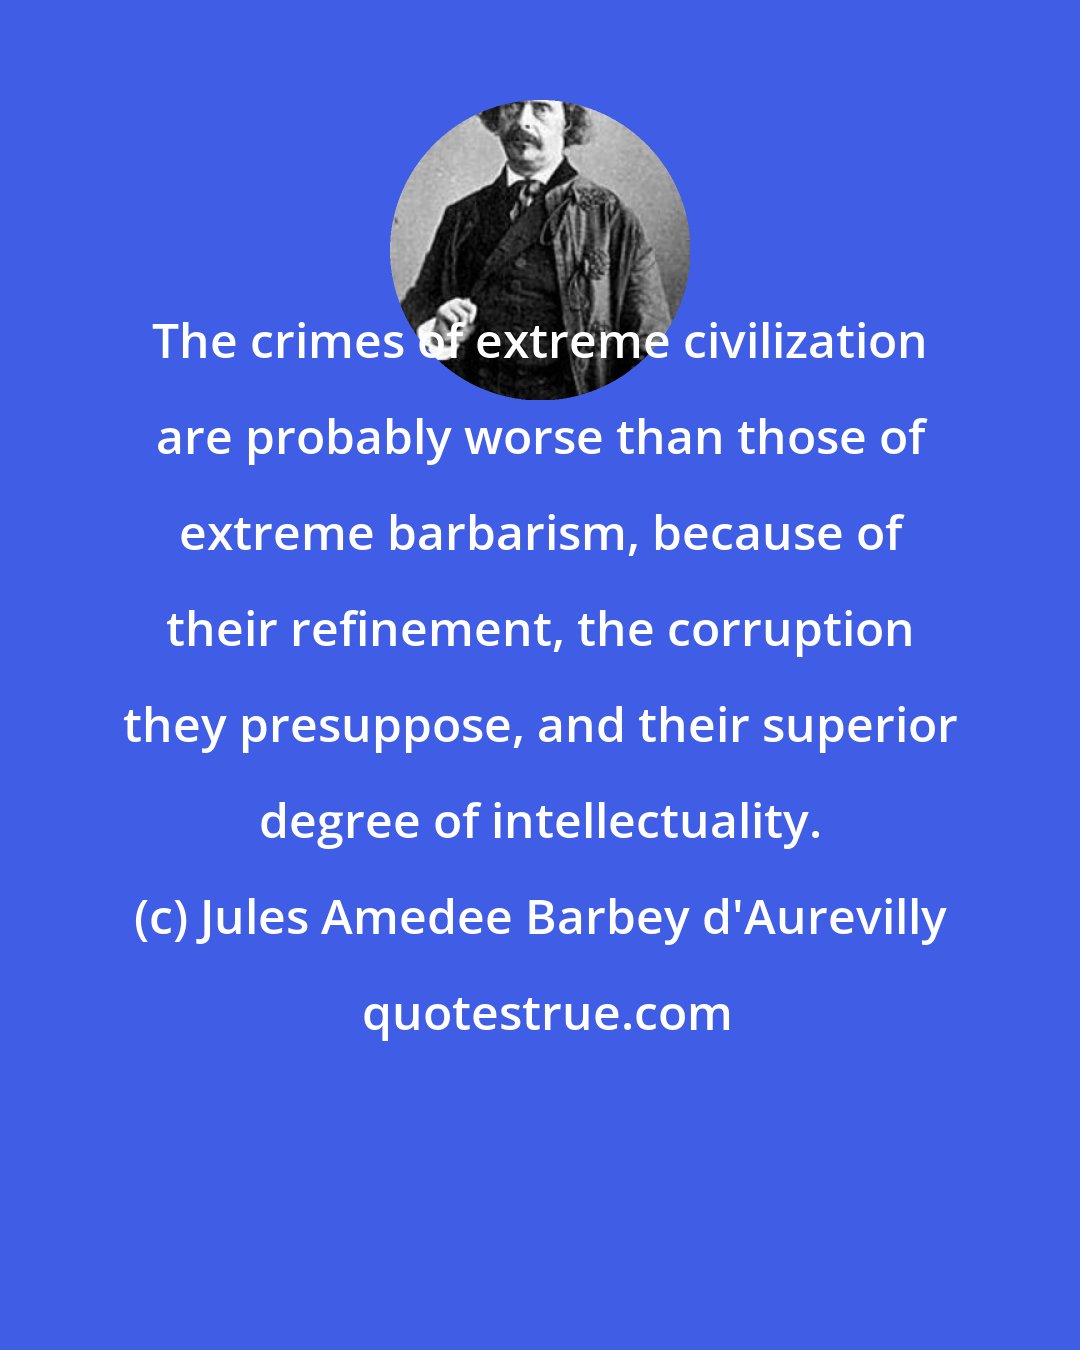 Jules Amedee Barbey d'Aurevilly: The crimes of extreme civilization are probably worse than those of extreme barbarism, because of their refinement, the corruption they presuppose, and their superior degree of intellectuality.